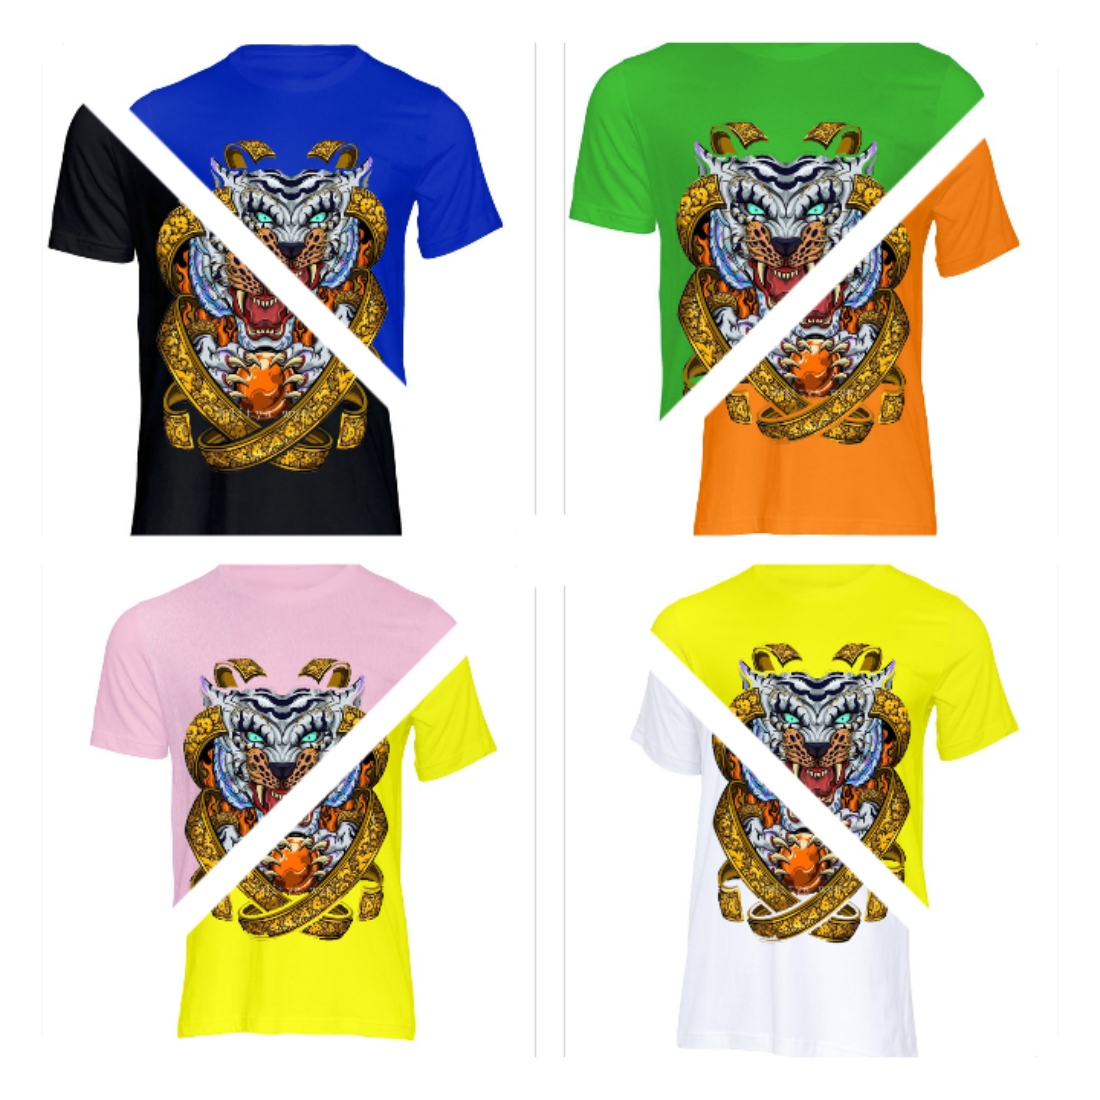 Tiger Desings in 7 DIFFERENT COLORS cover image.